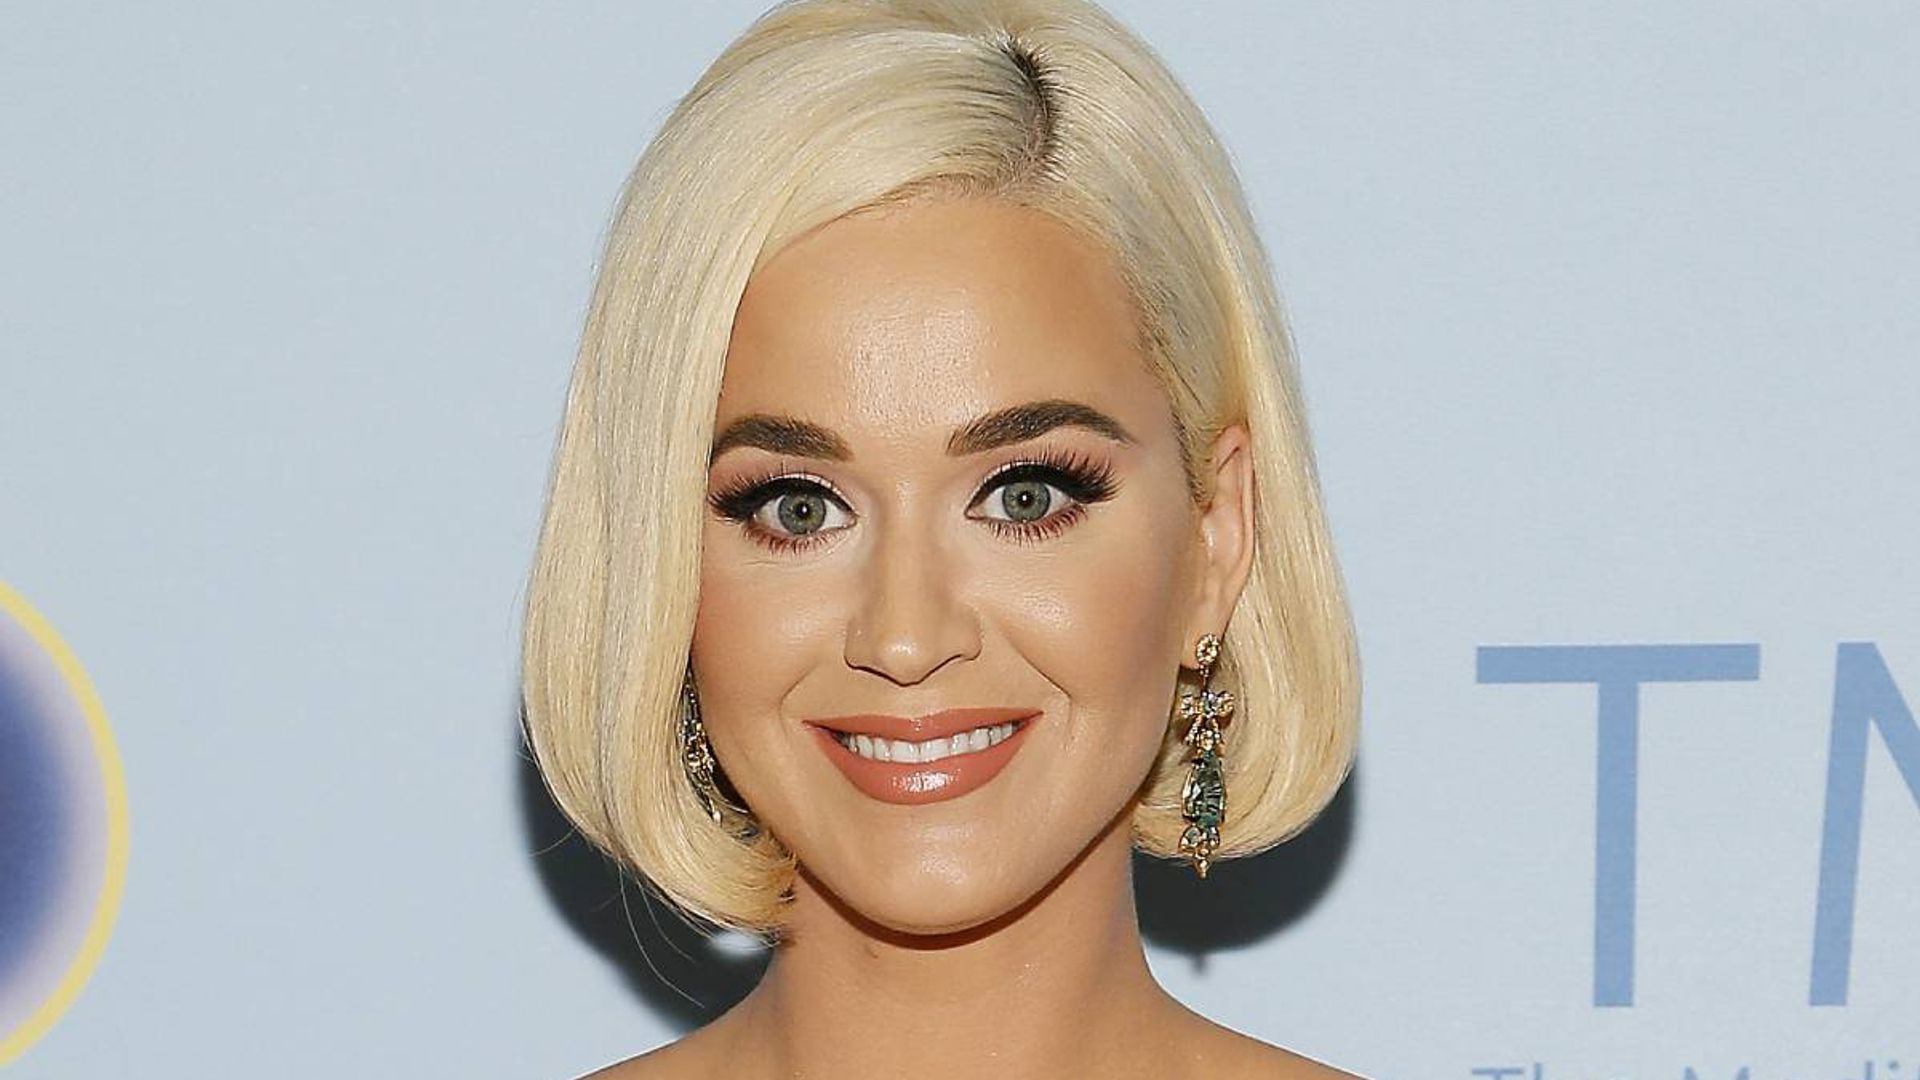 Katy Perry pays tribute to daughter Daisy in new video – see her name necklace